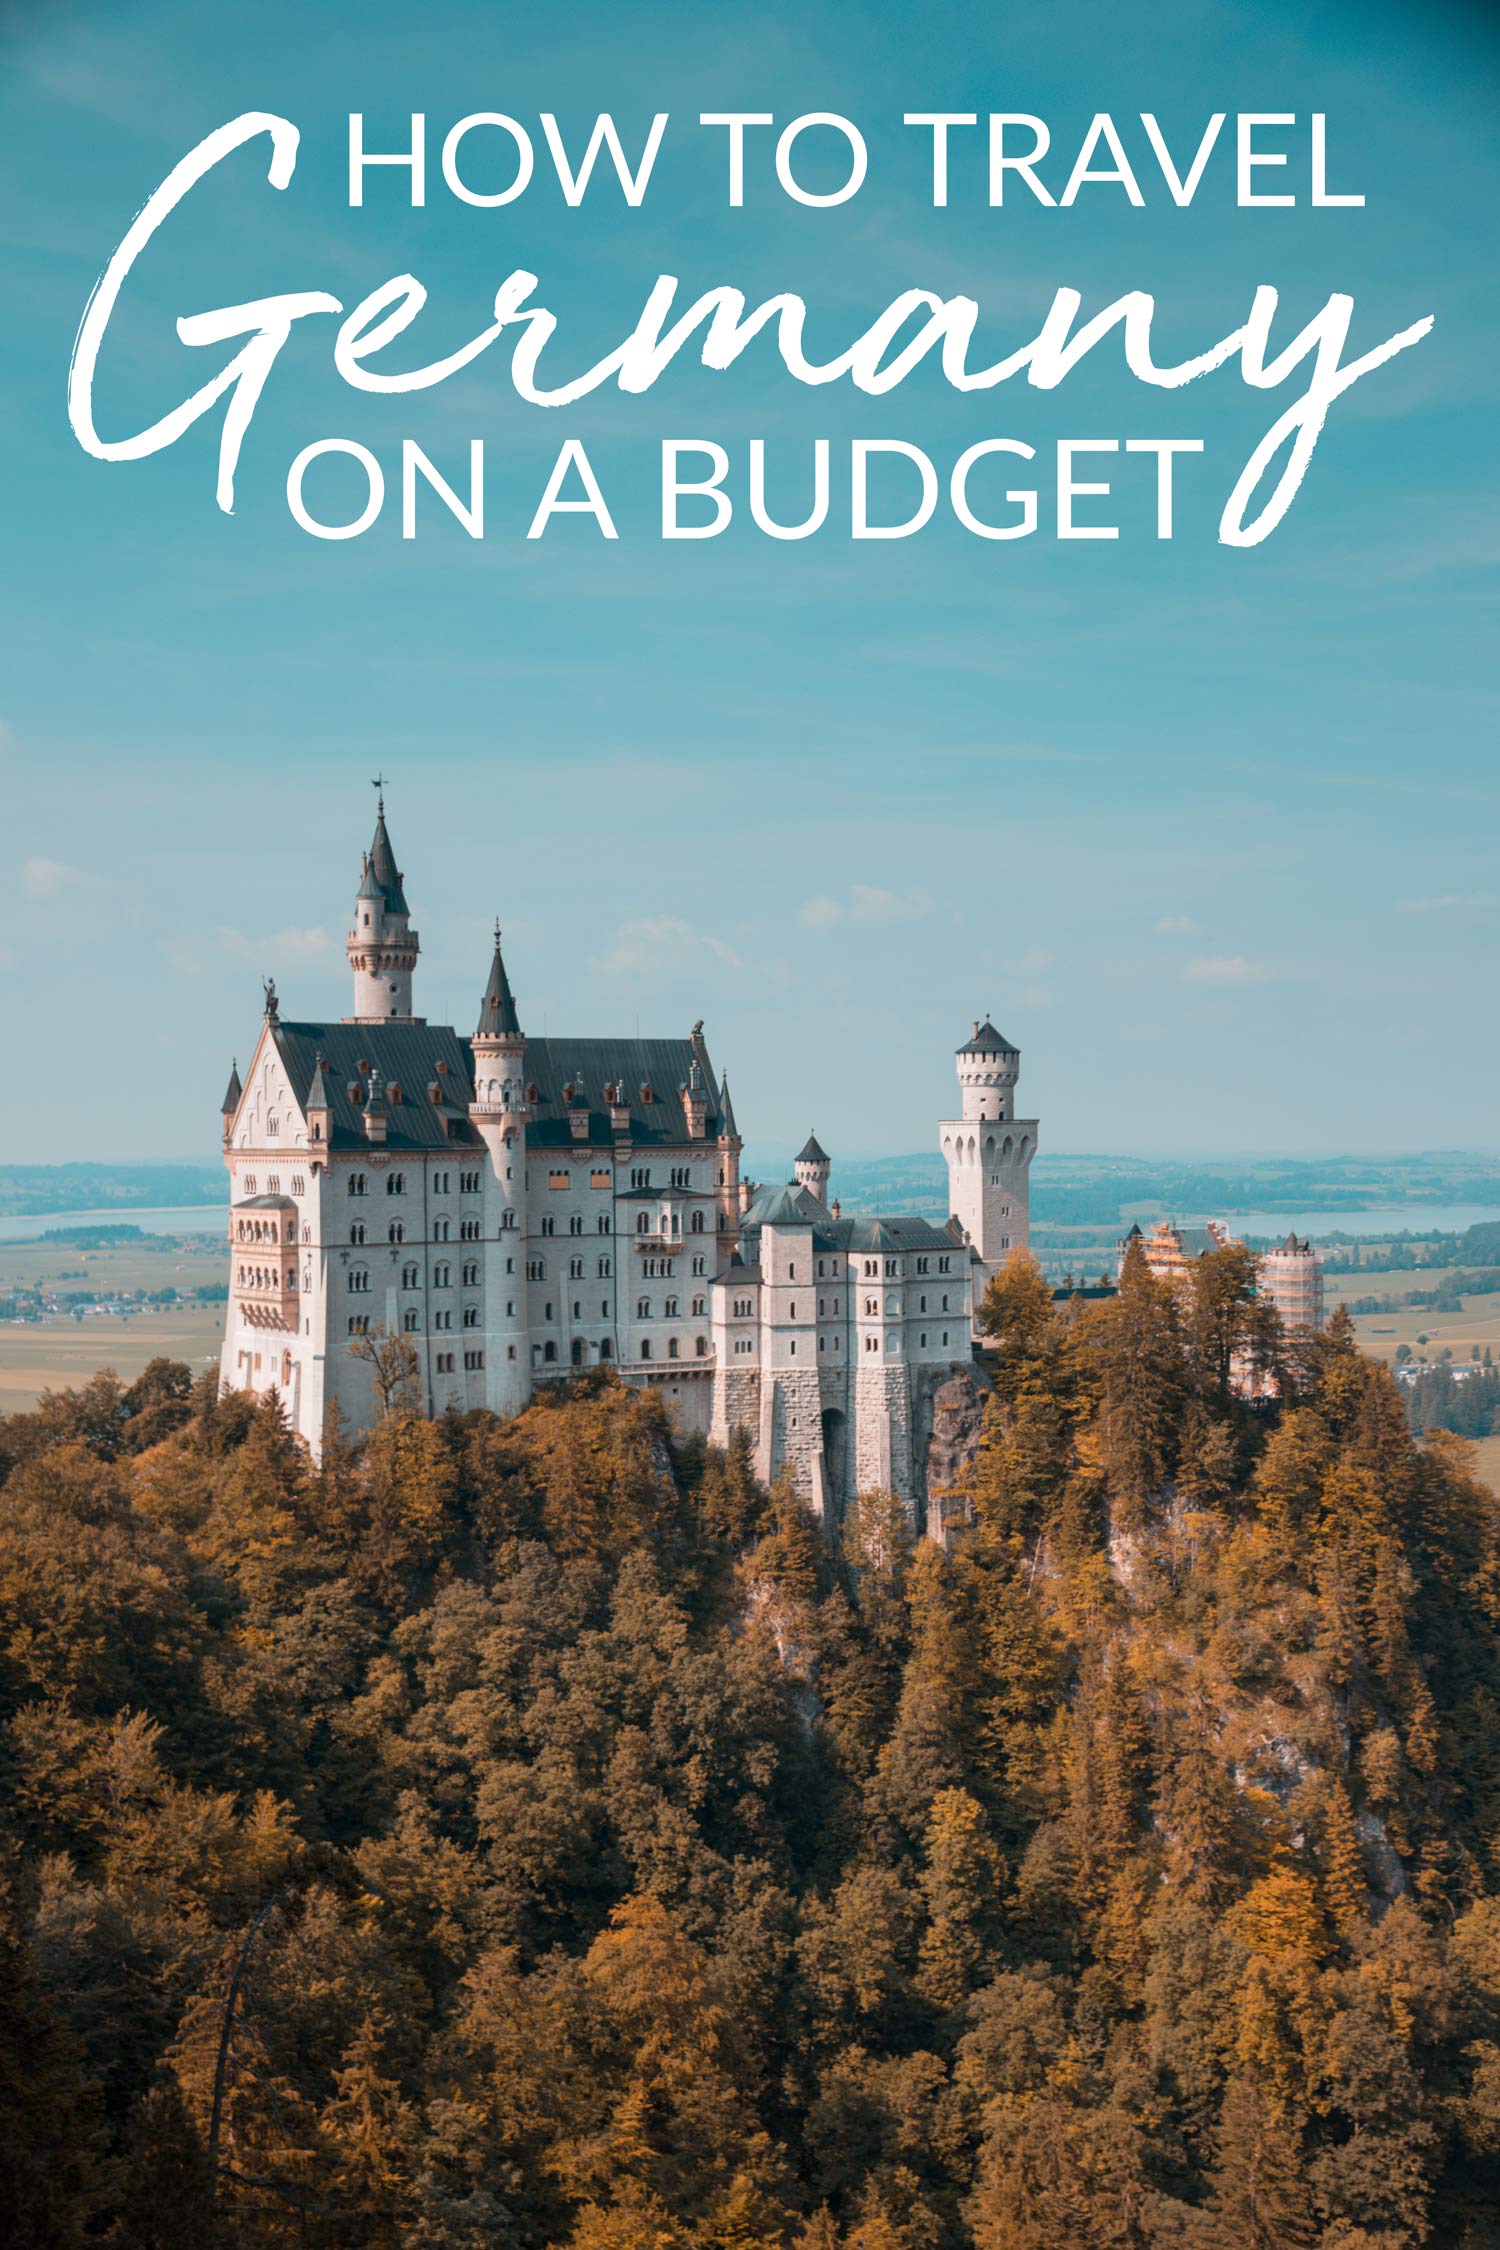 How to Travel Germany on a Budget